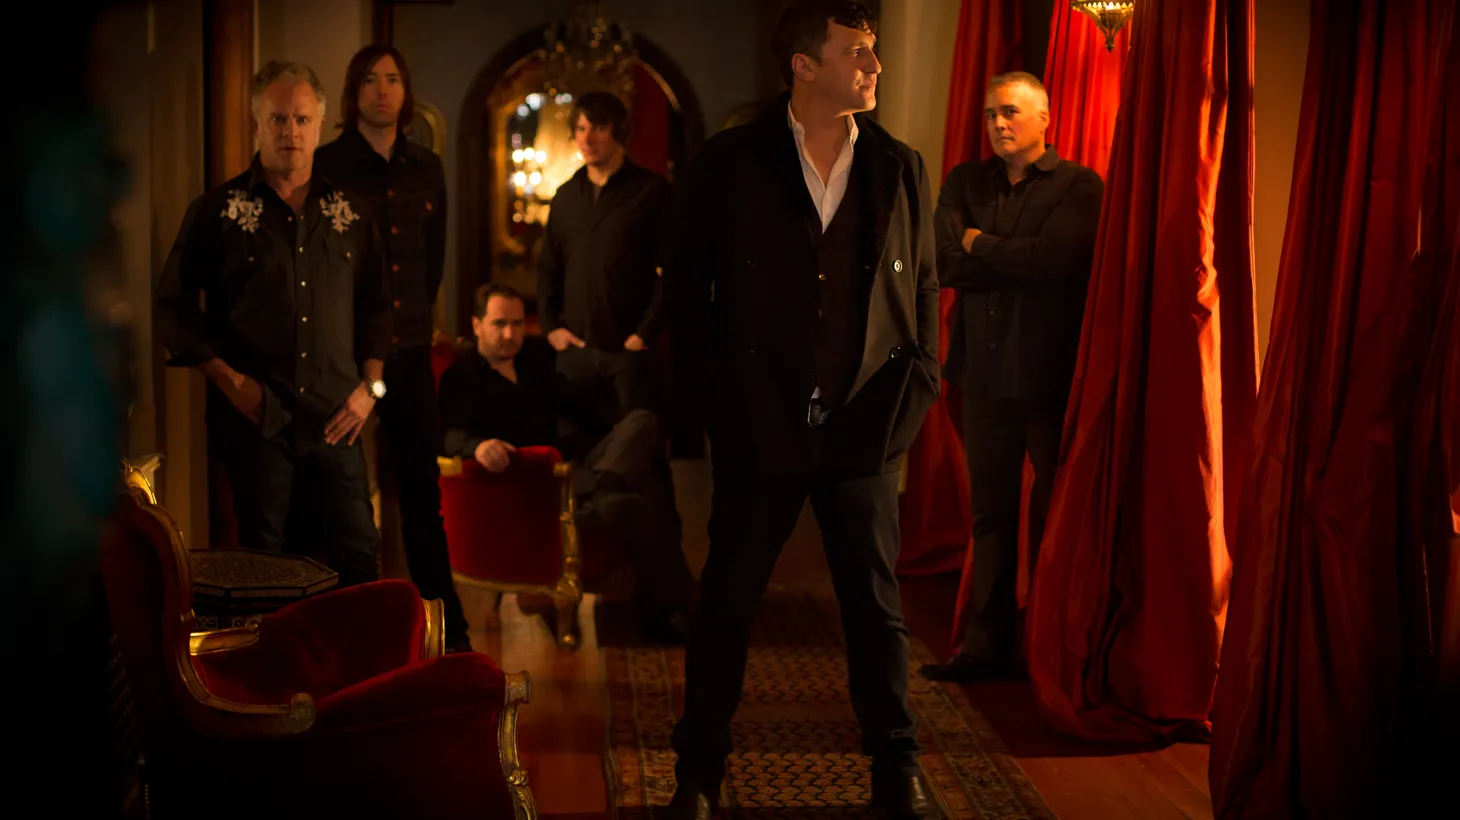 The Afghan Whigs reunited after a decade-long hiatus and played a set of soul-powered rock on Morning Becomes Eclectic.